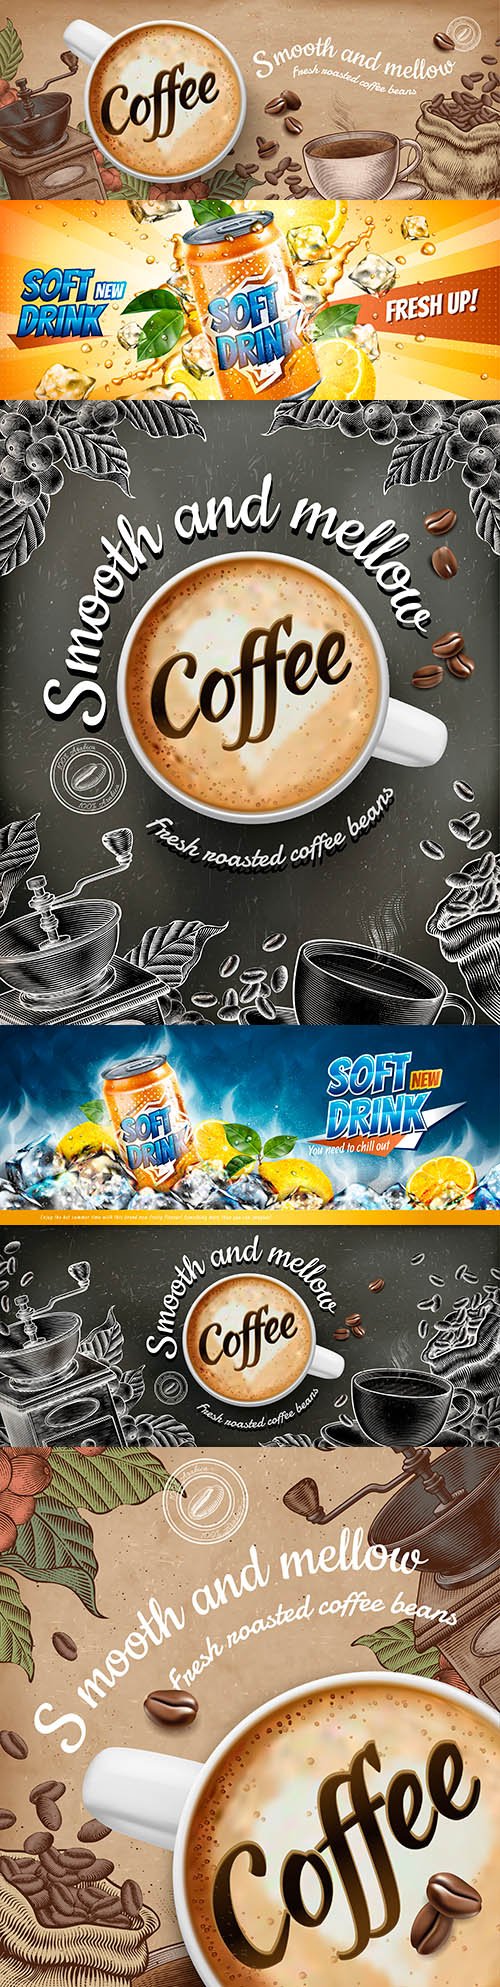 Banner advertising of soft citrus drinks and coffee latte